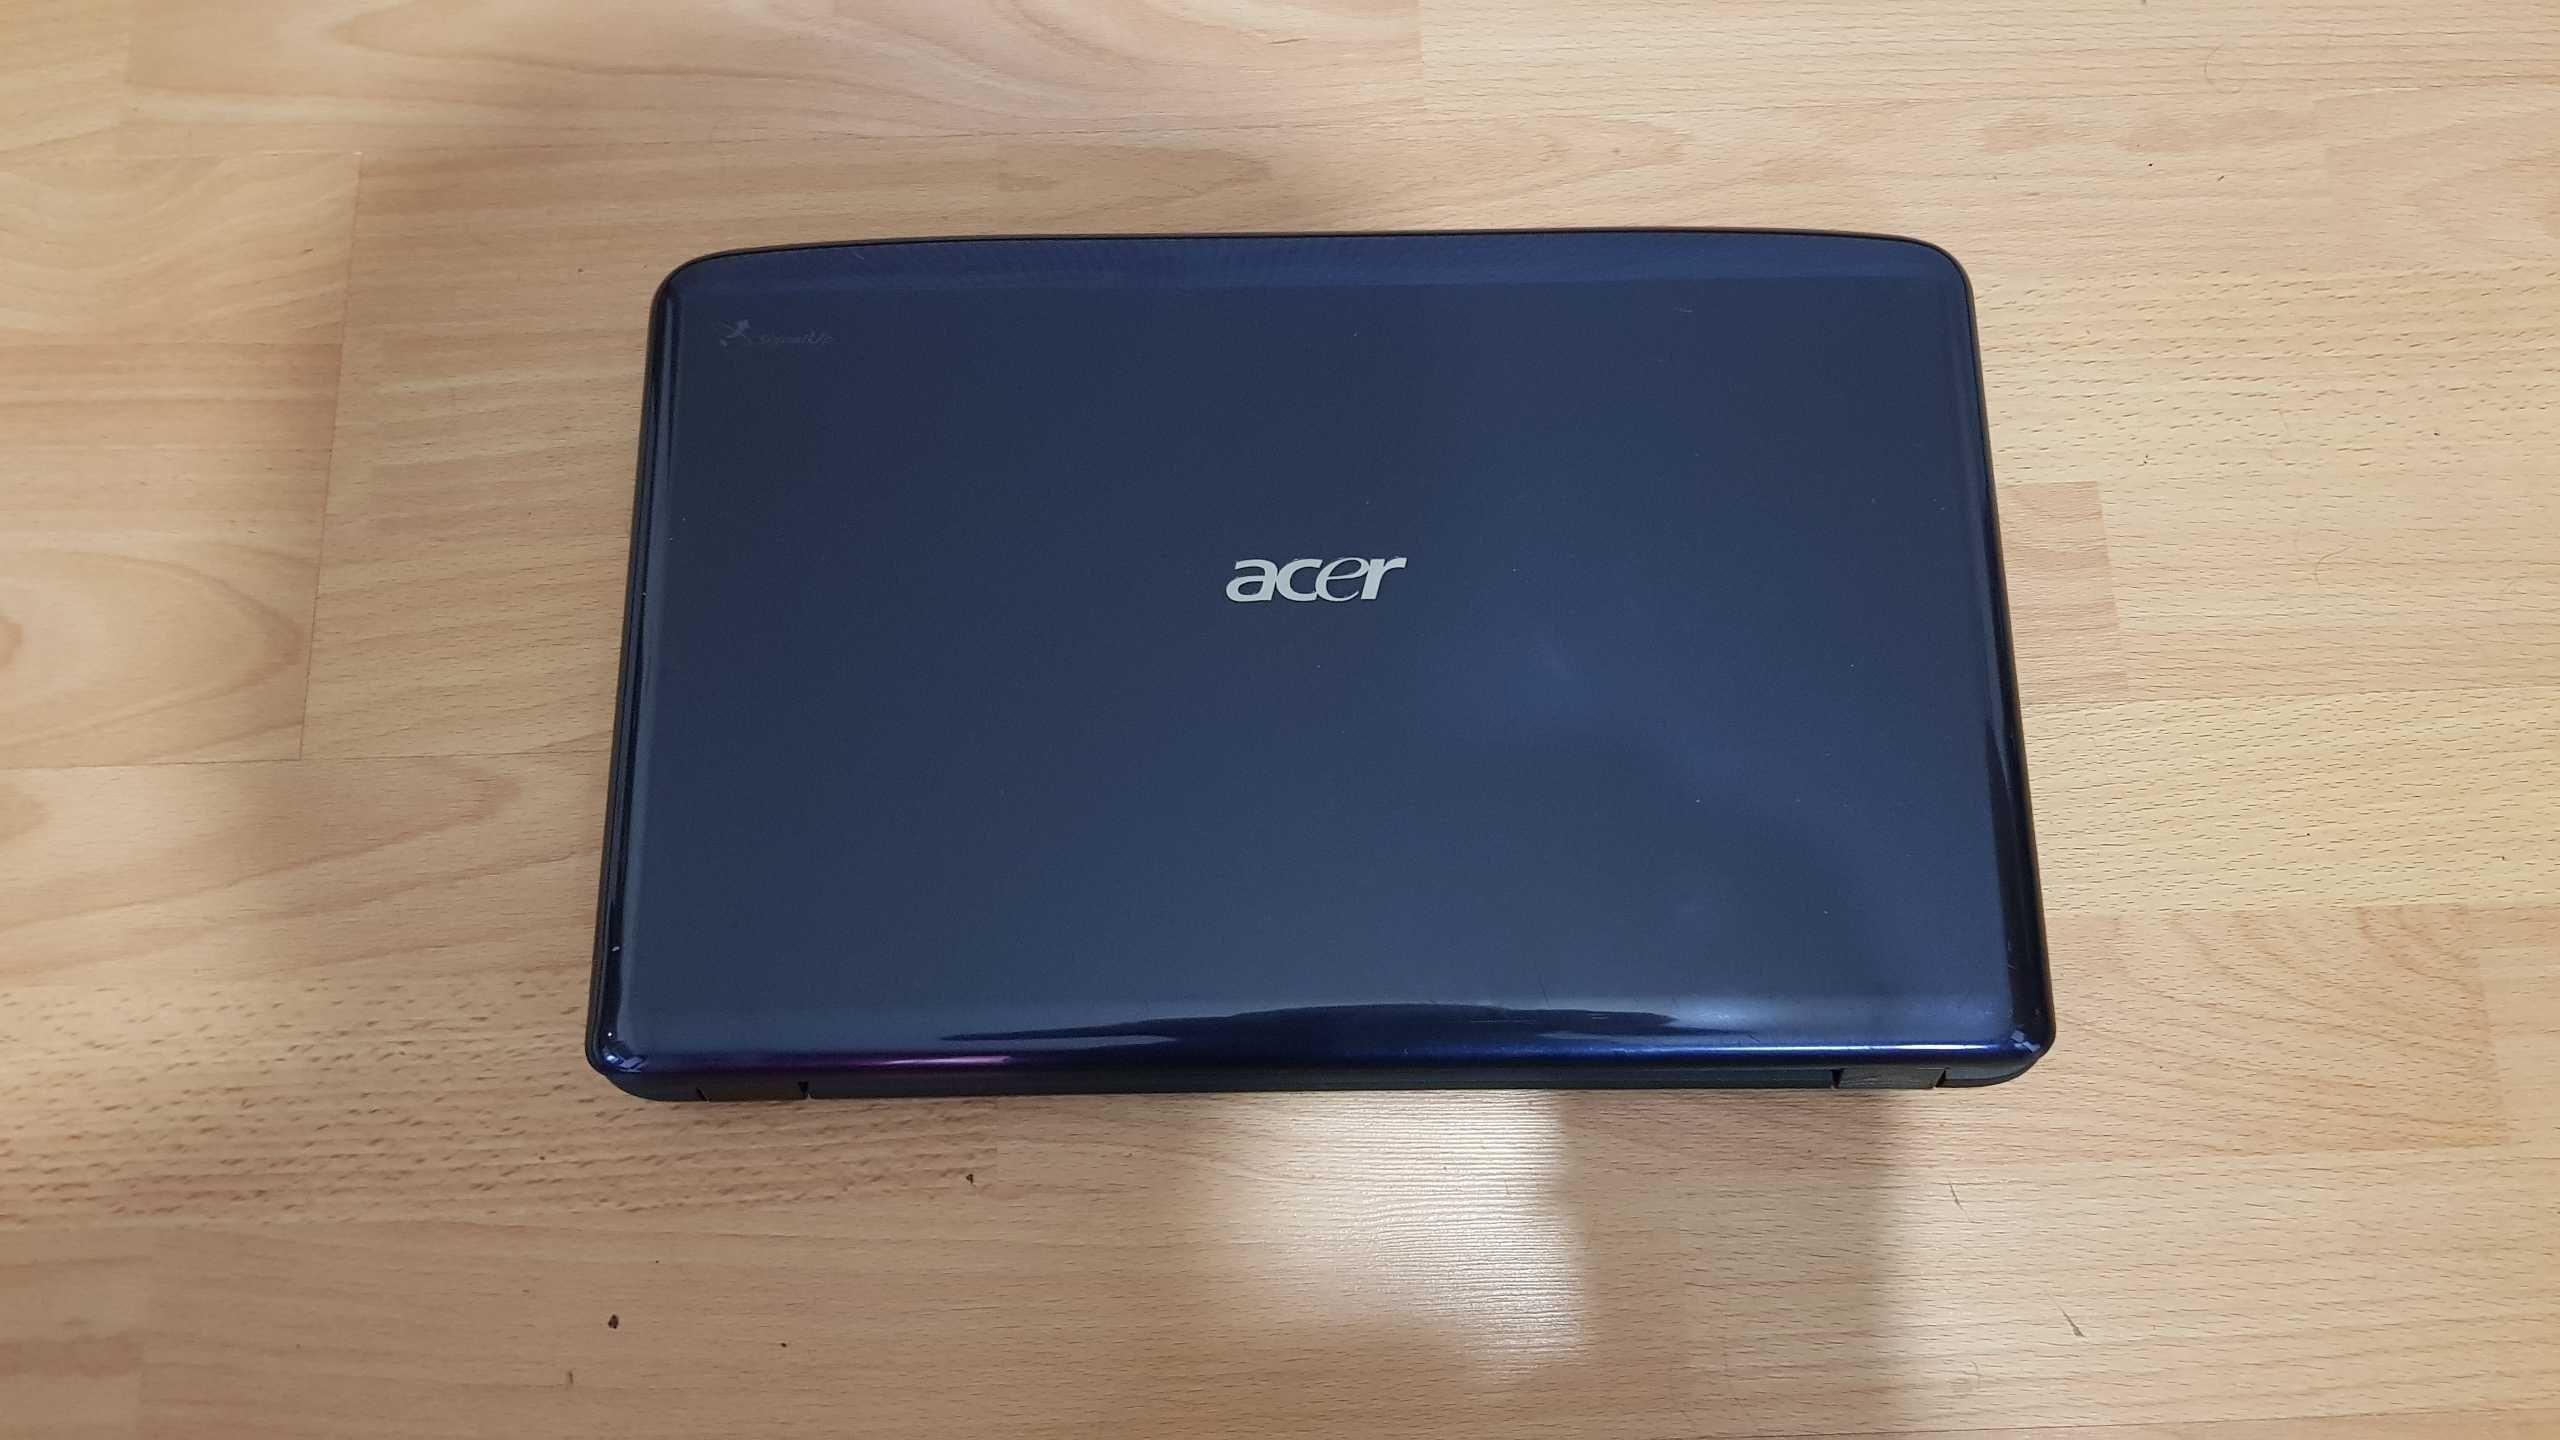 Acer 5738g -Impecabil